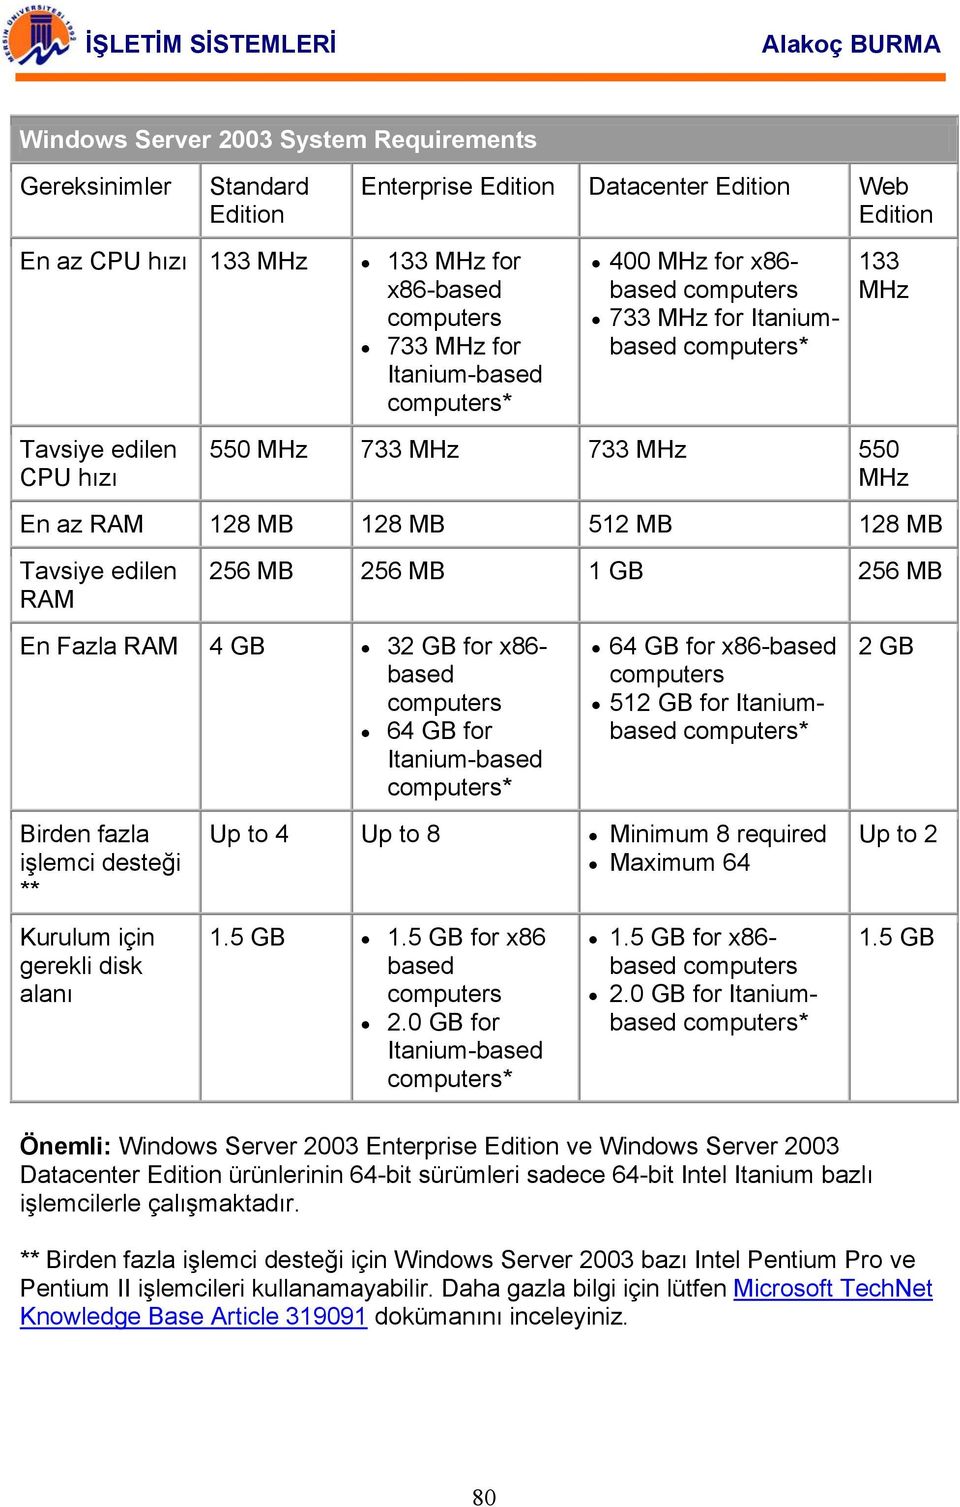 256 MB 1 GB 256 MB En Fazla RAM 4 GB 32 GB for x86- based computers 64 GB for Itanium-based 64 GB for x86-based computers 512 GB for Itaniumbased 2 GB Birden fazla işlemci desteği ** Up to 4 Up to 8